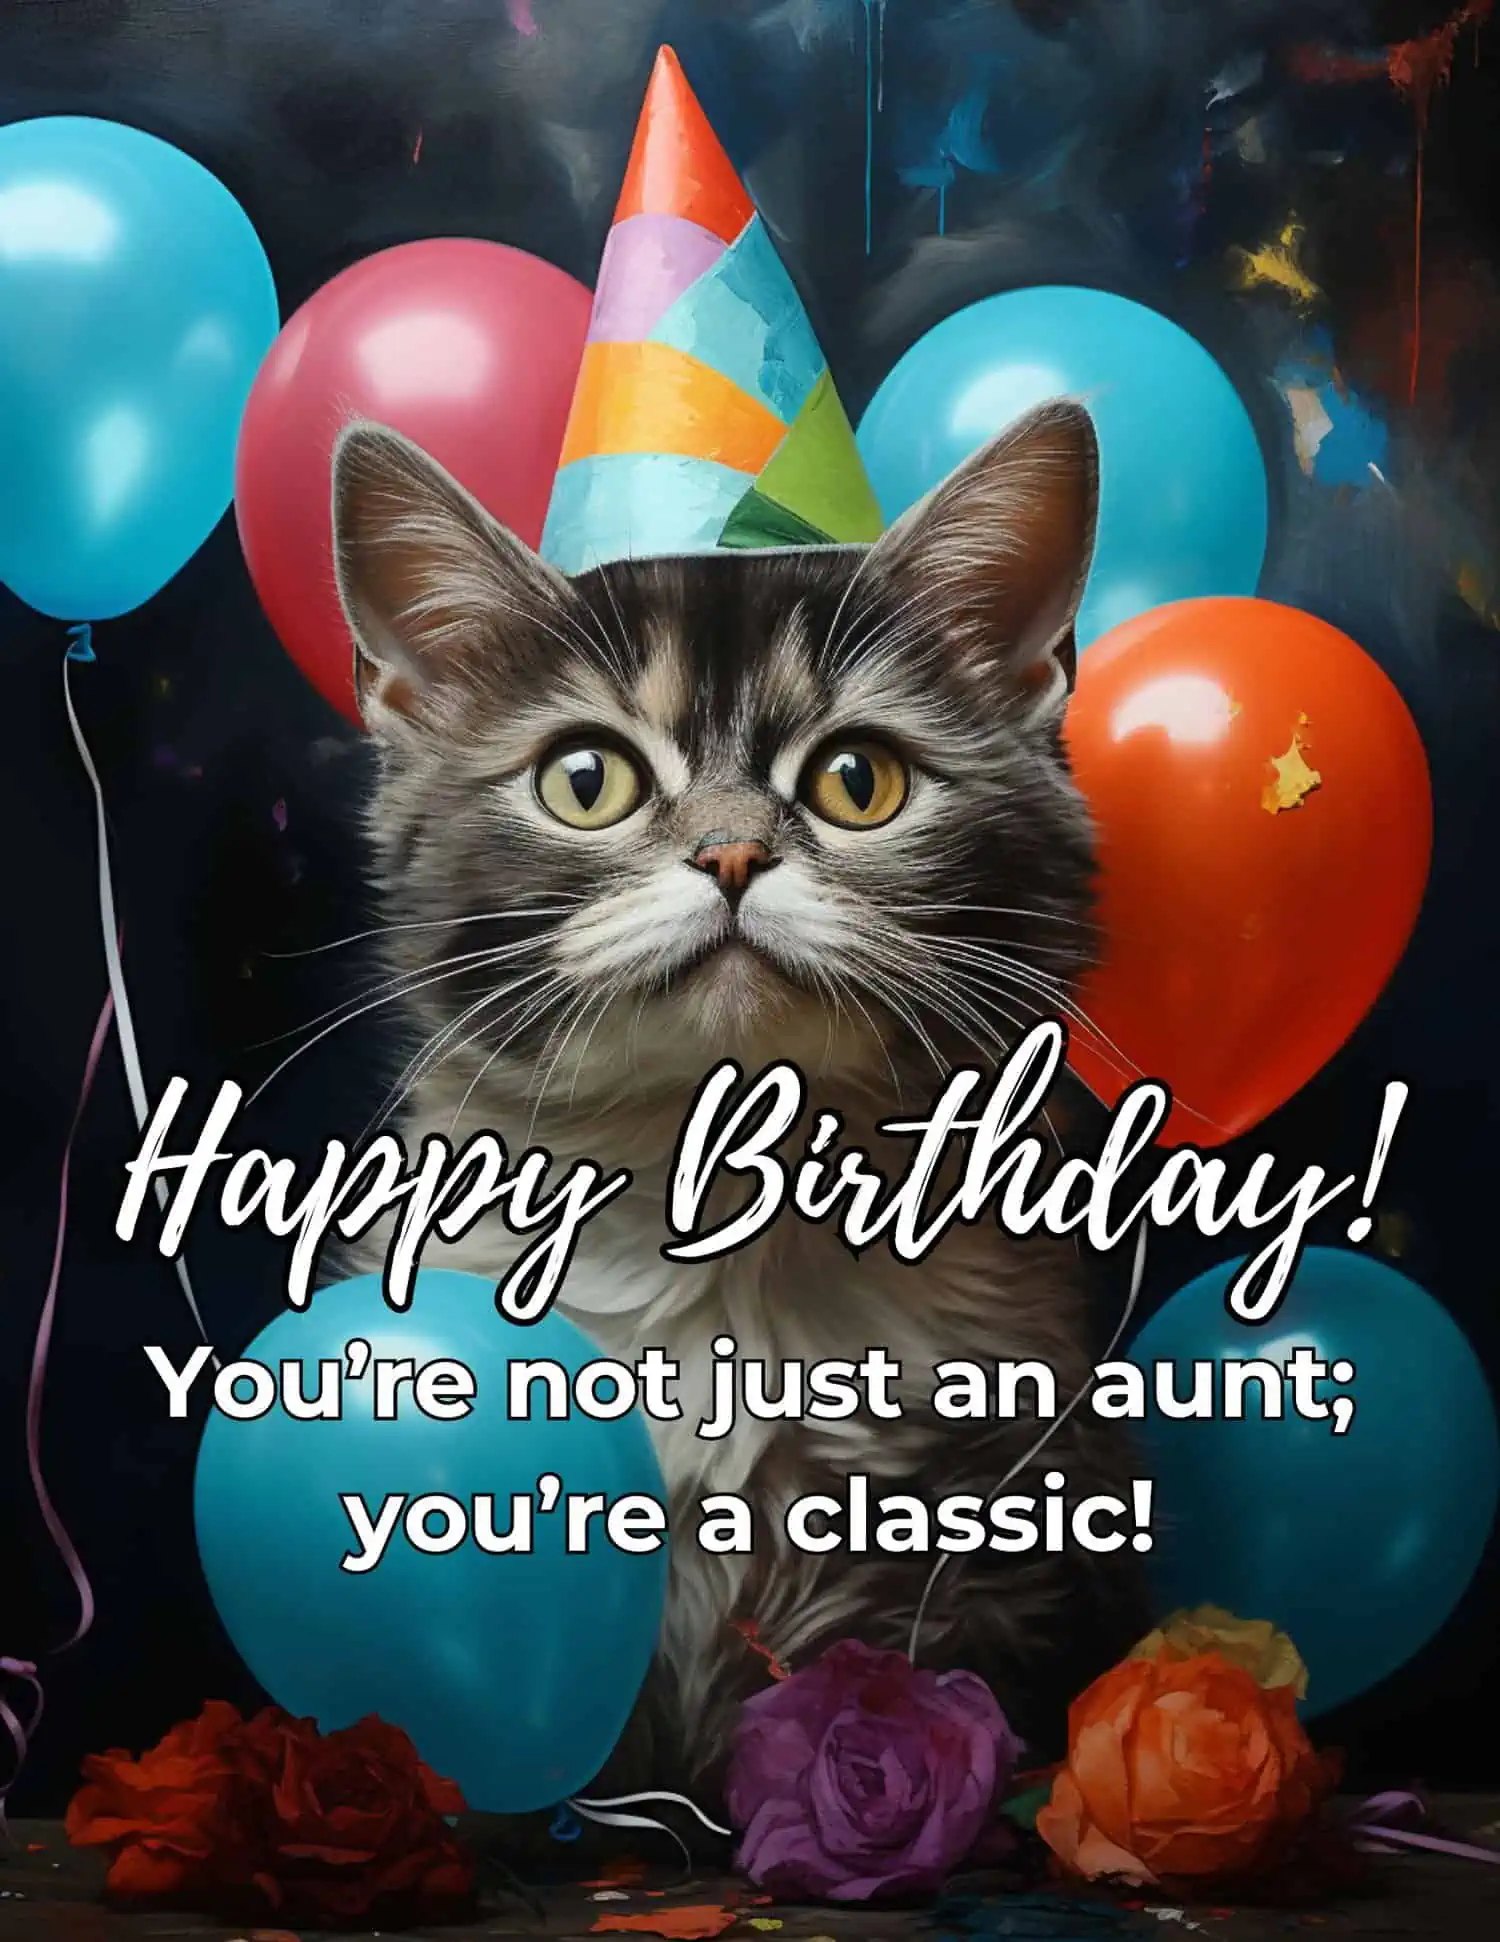 A delightful compilation of humorous and light-hearted birthday wishes, perfect for bringing a smile to any aunt's face on her special day.